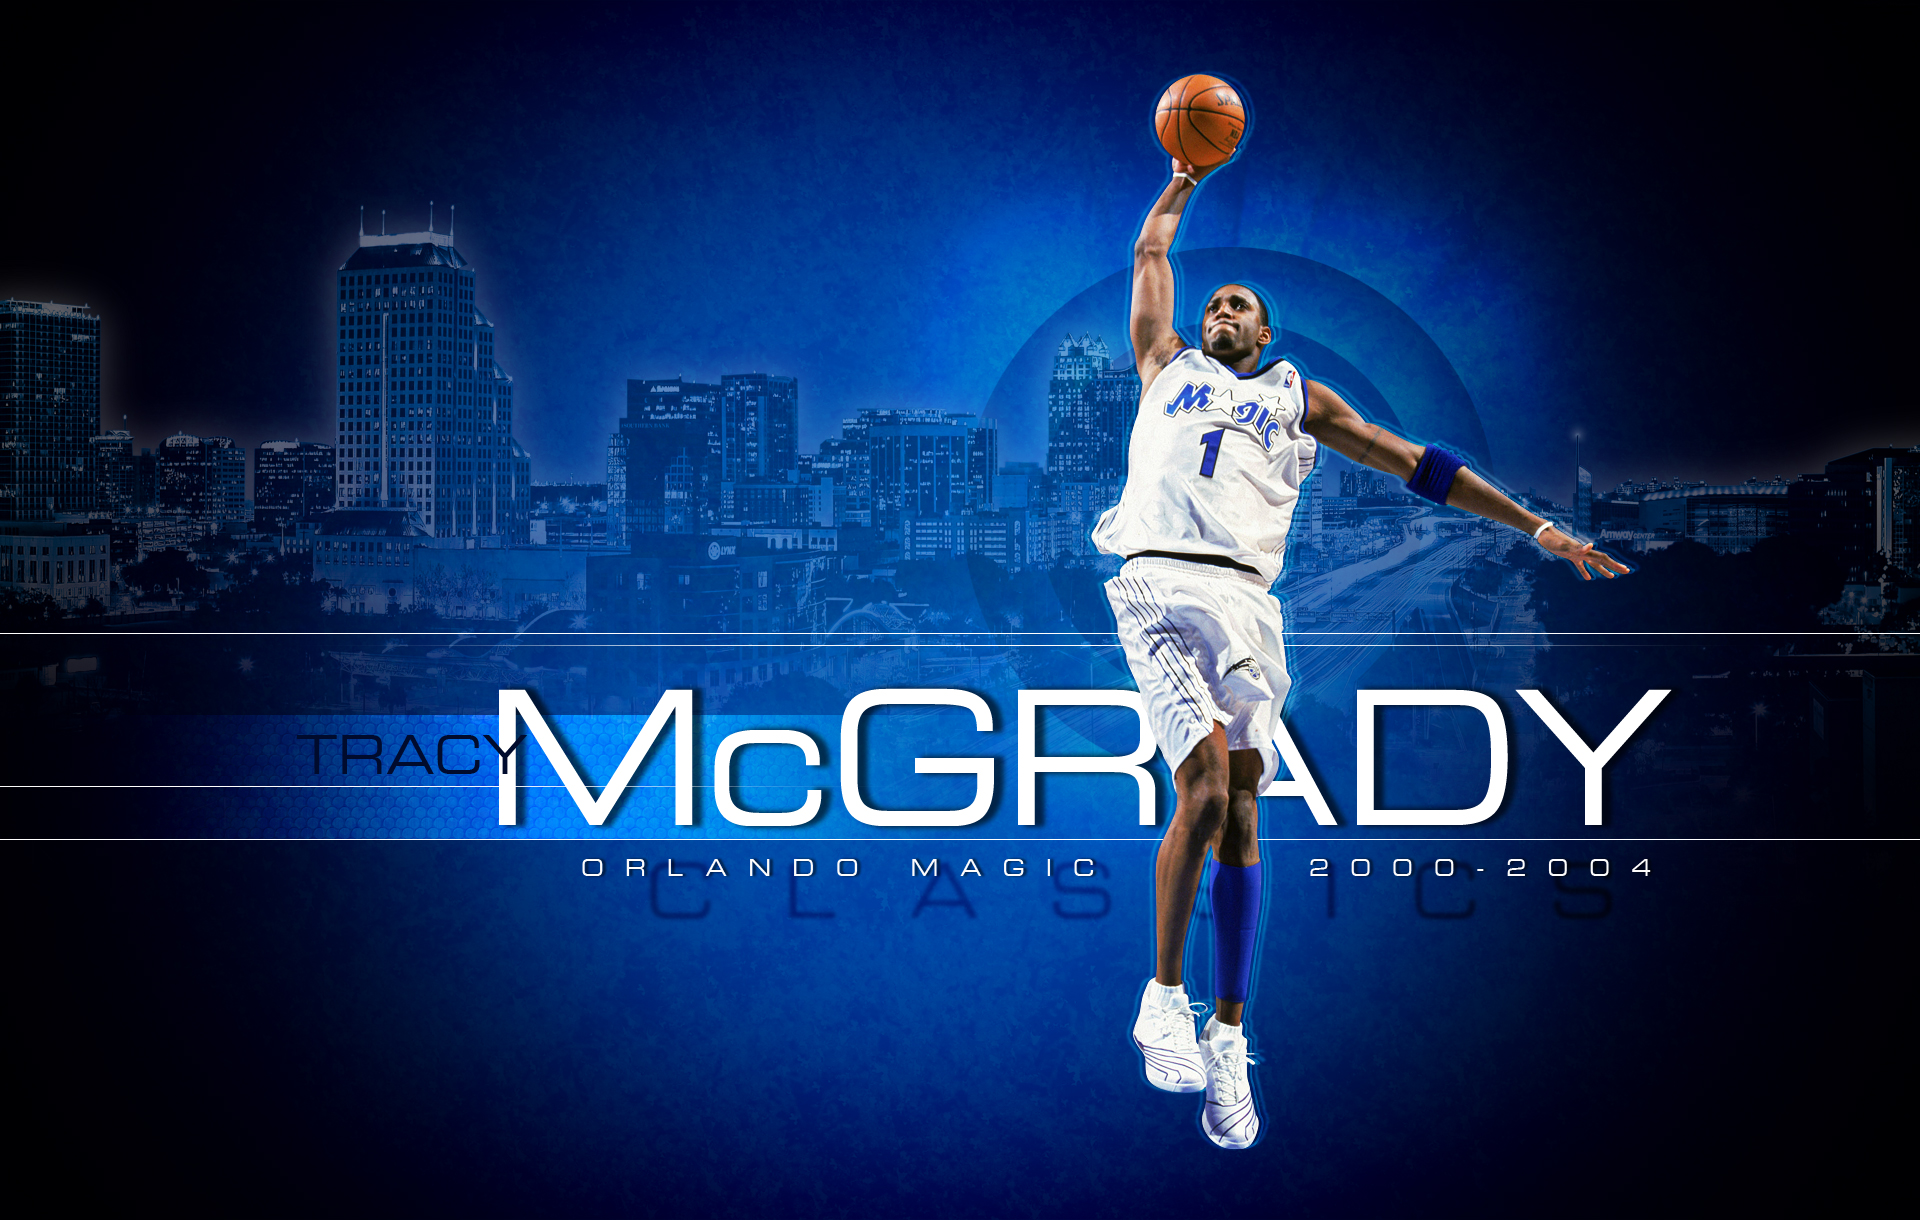 Magic Throwback Wallpapers THE OFFICIAL SITE OF THE ORLANDO MAGIC